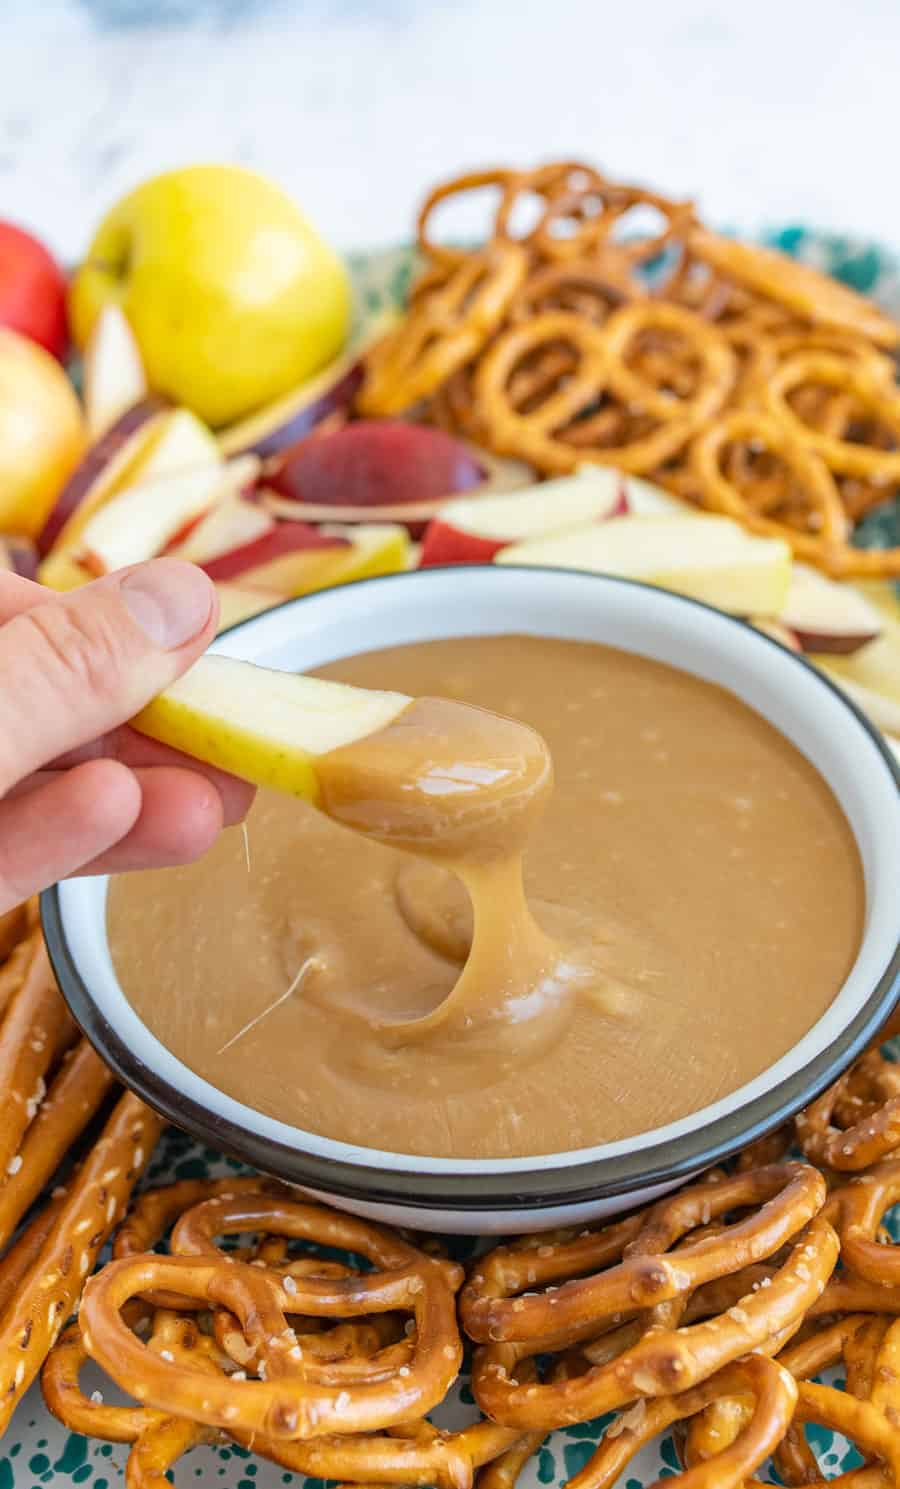 This is the best caramel dip ever. Made on the stove with butter, sugar, and sweetened condensed milk, it's the perfect consistency for dipping pretzels and apples. #homemadecaramel #carameldip #easycaramelrecipe #bestcaramel #thebestcaramel #bestcaramelrecipe #caramelapples #dippingcaramel